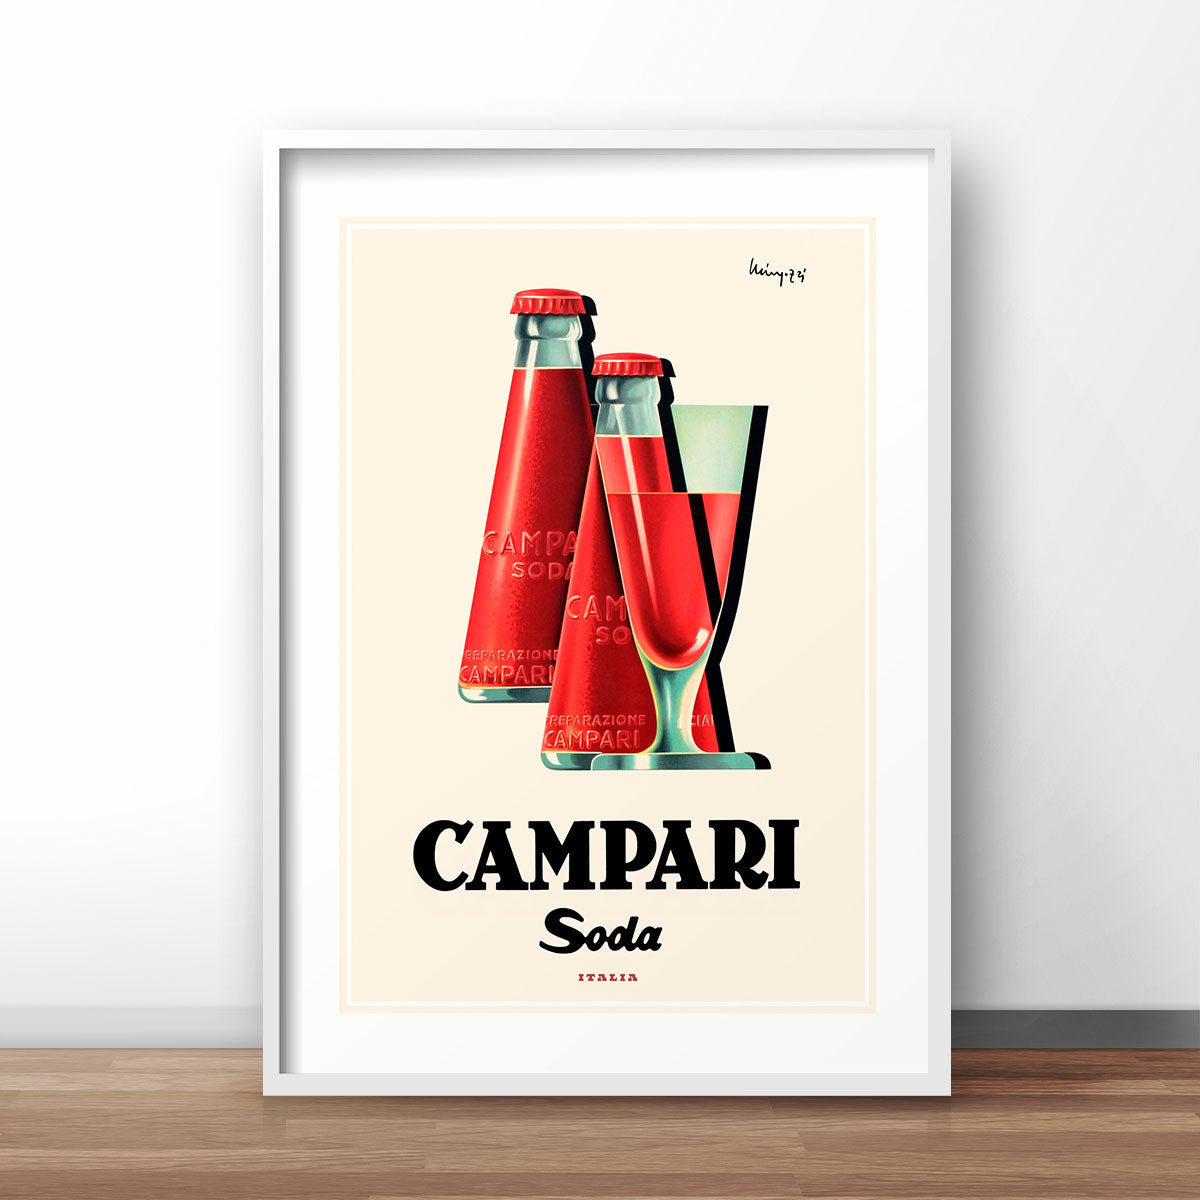 Campari Soda Italy retro vintage poster print from Places We Luv